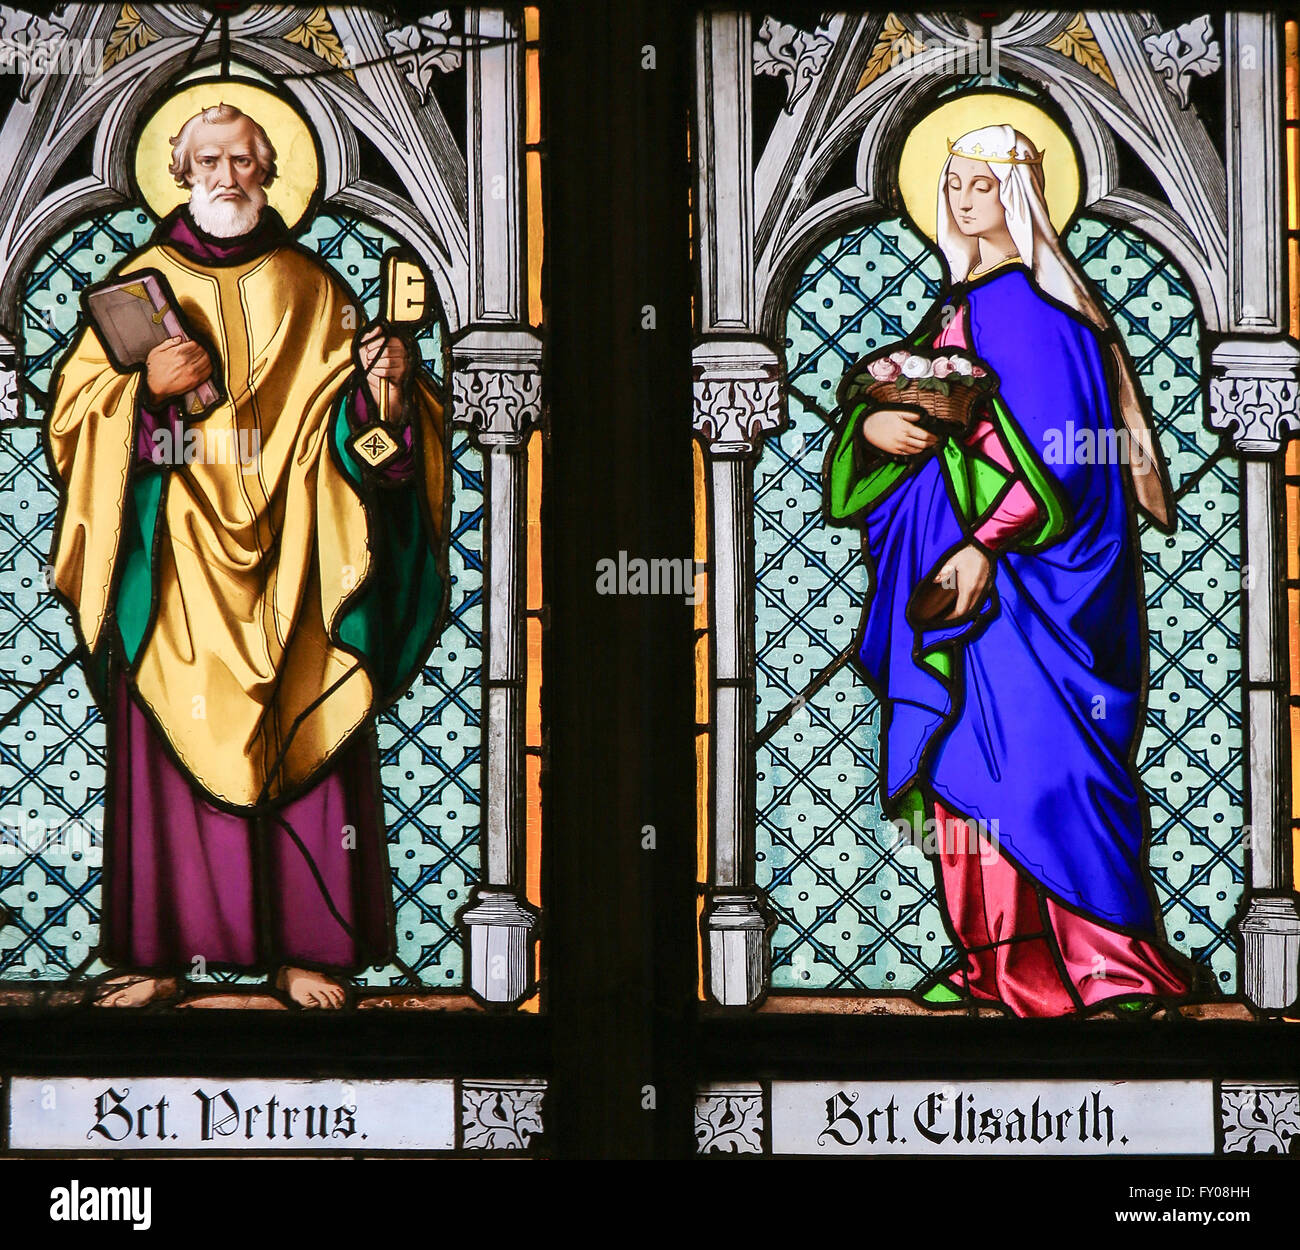 Stained Glass window in St. Vitus Cathedral, Prague, depicting Saint Peter and Saint Elisabeth Stock Photo